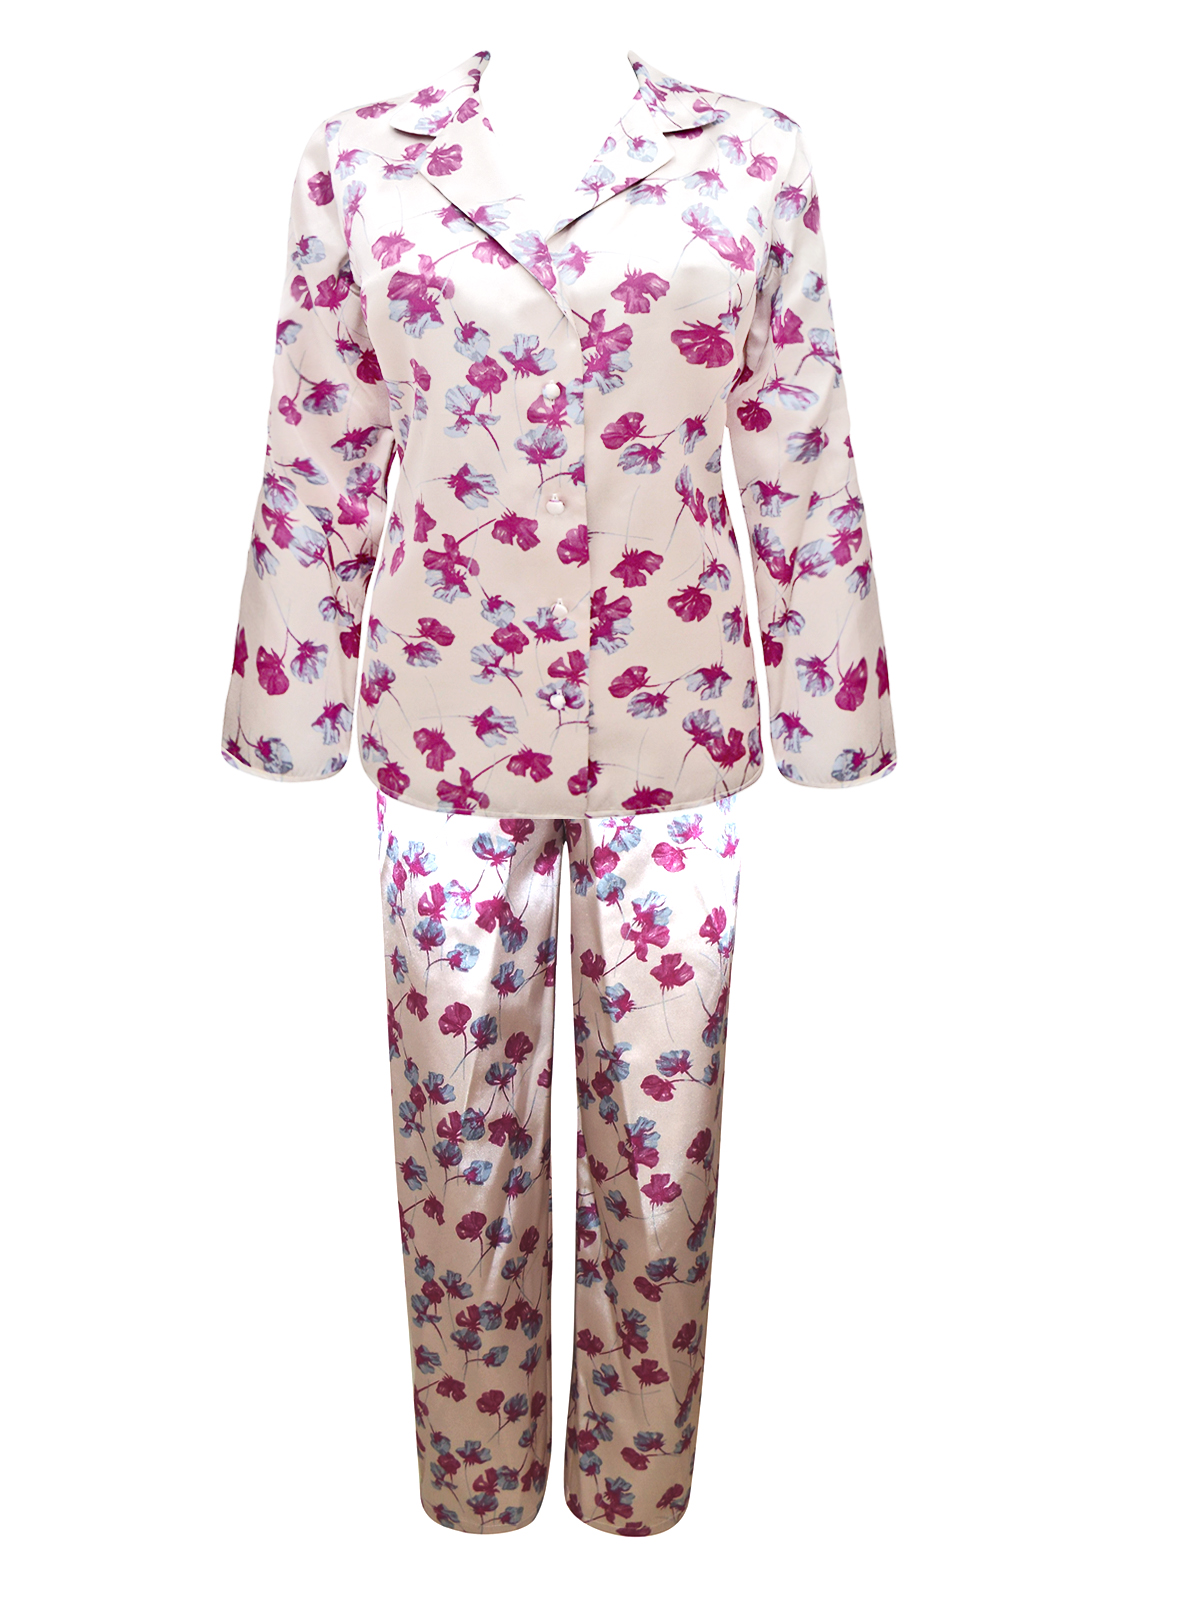 Marks and Spencer - - M&5 PINK Floral Print Satin Pyjamas - Size 10 to 22